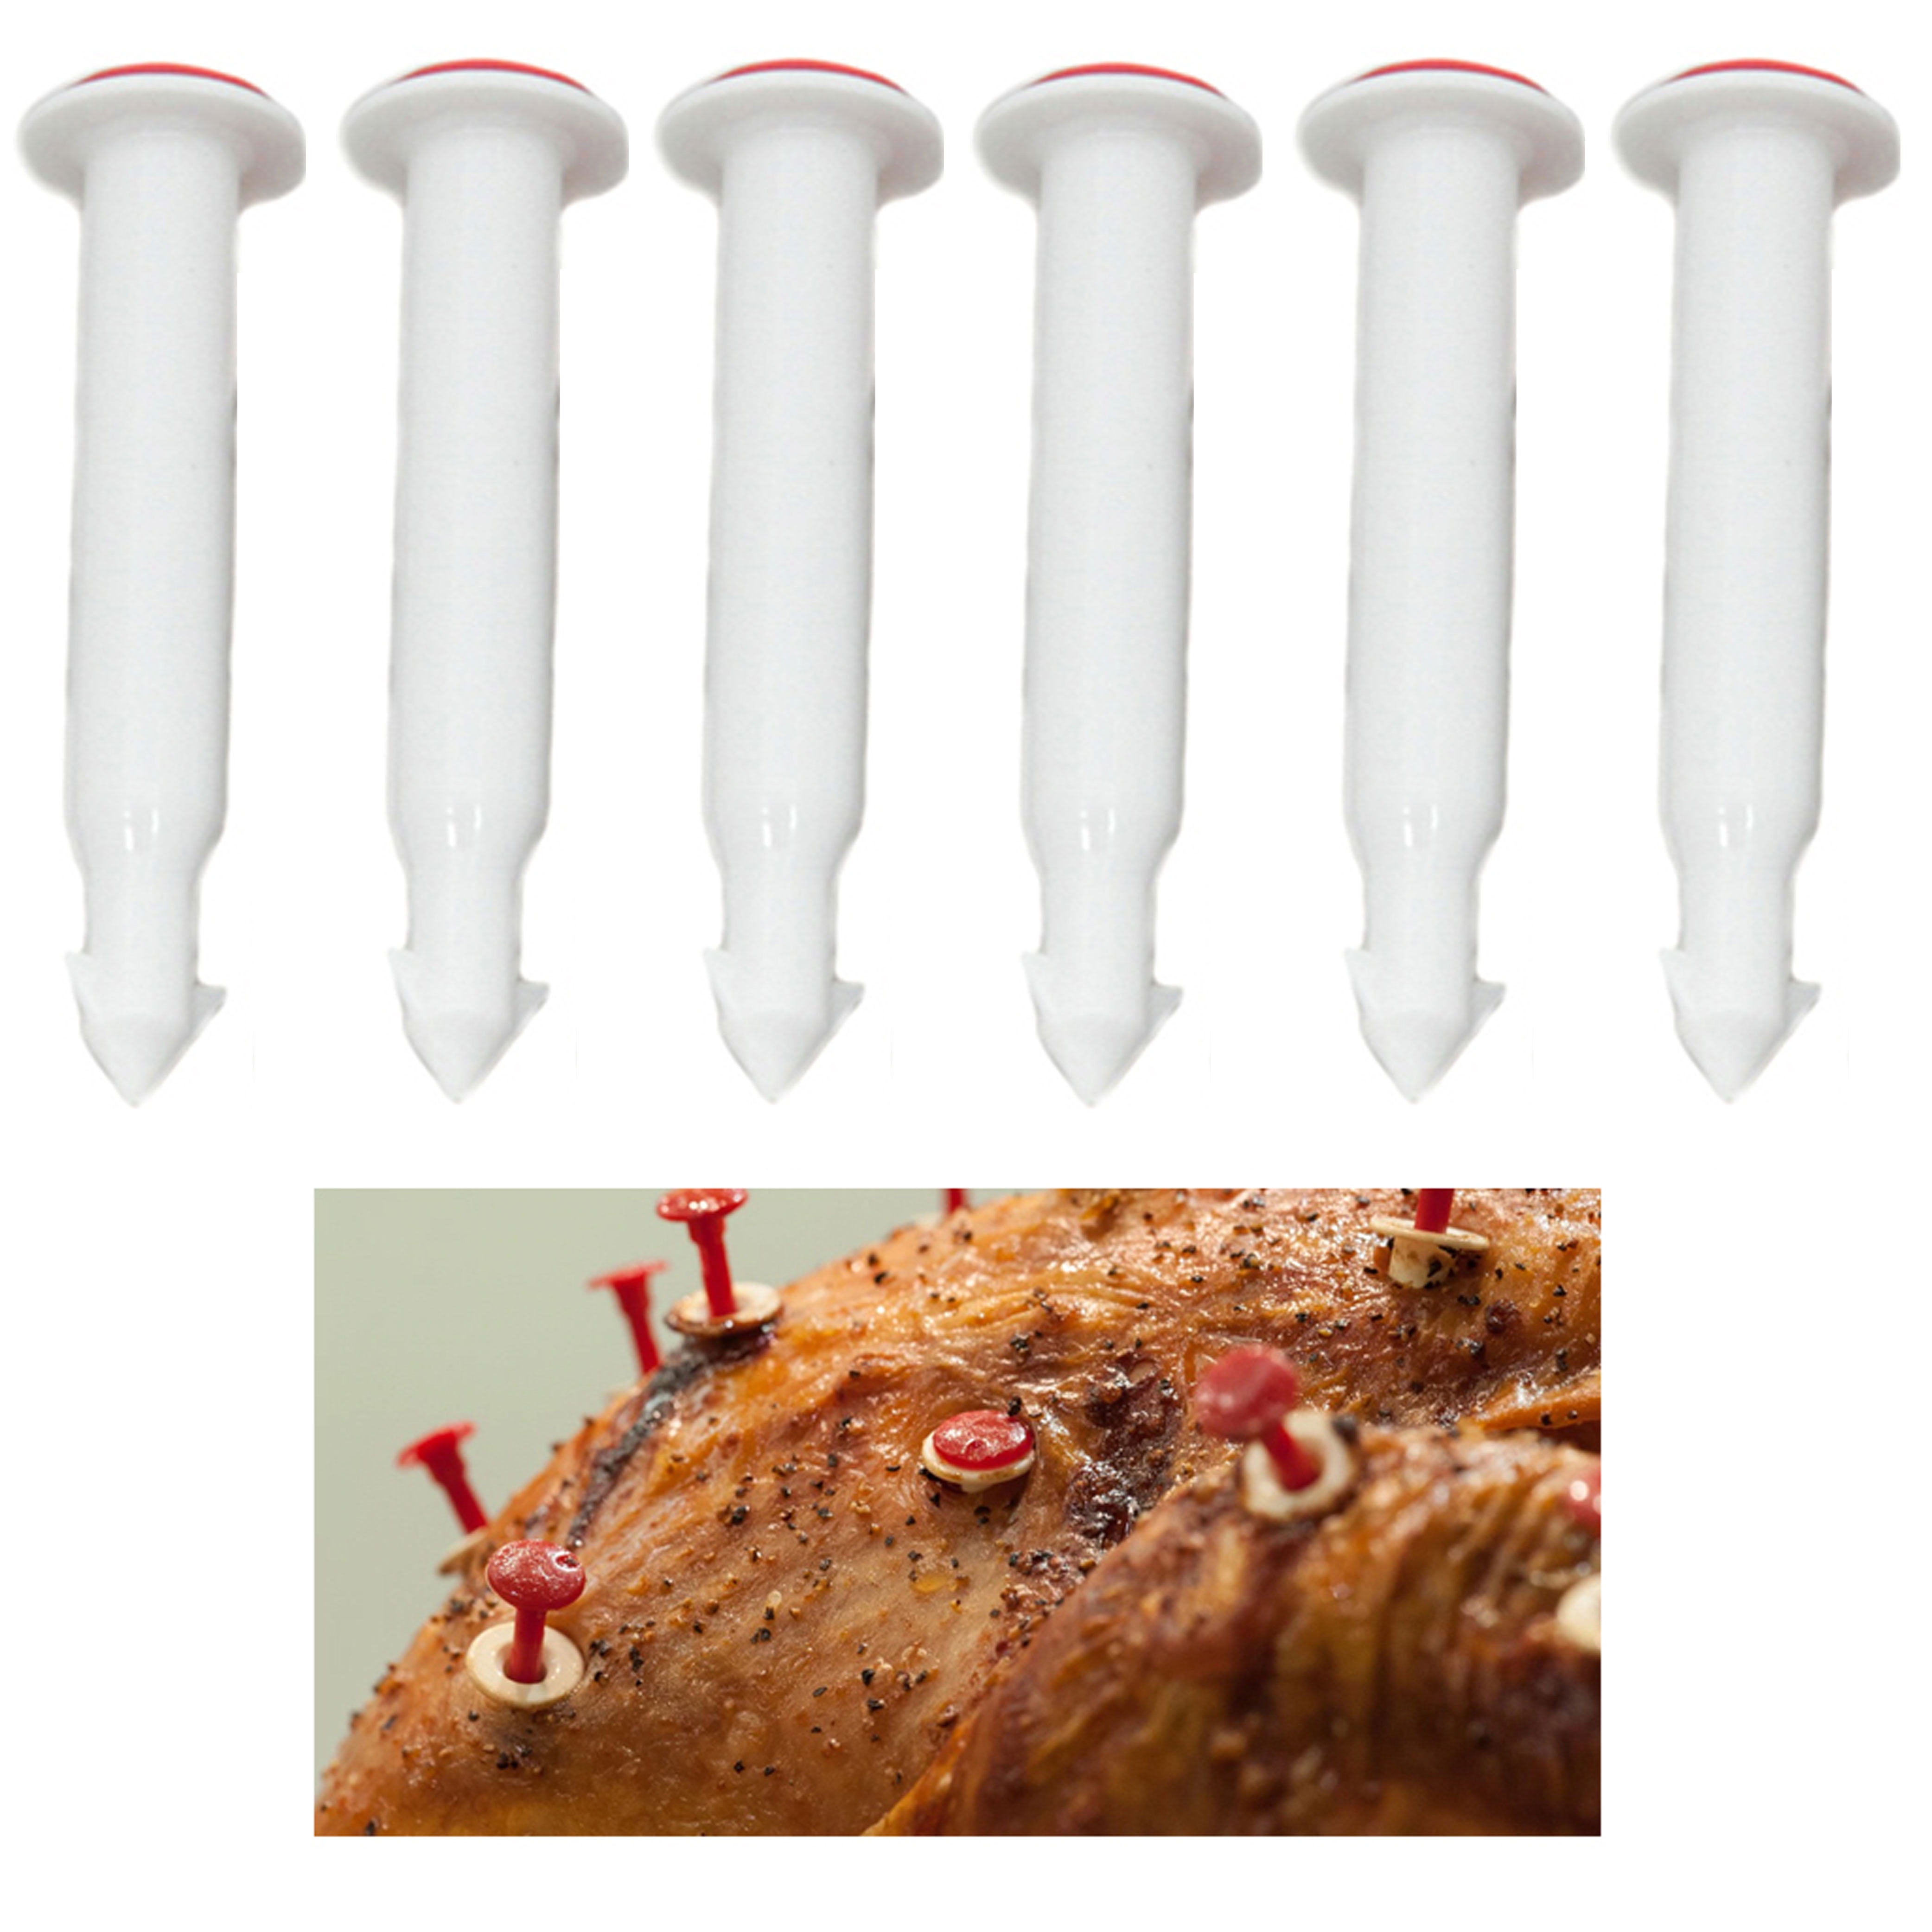  20pcs Turkey Timer, Pop Up Cooking Thermometer for Oven Cooking  Poultry Turkey Chicken Meat Beef: Home & Kitchen